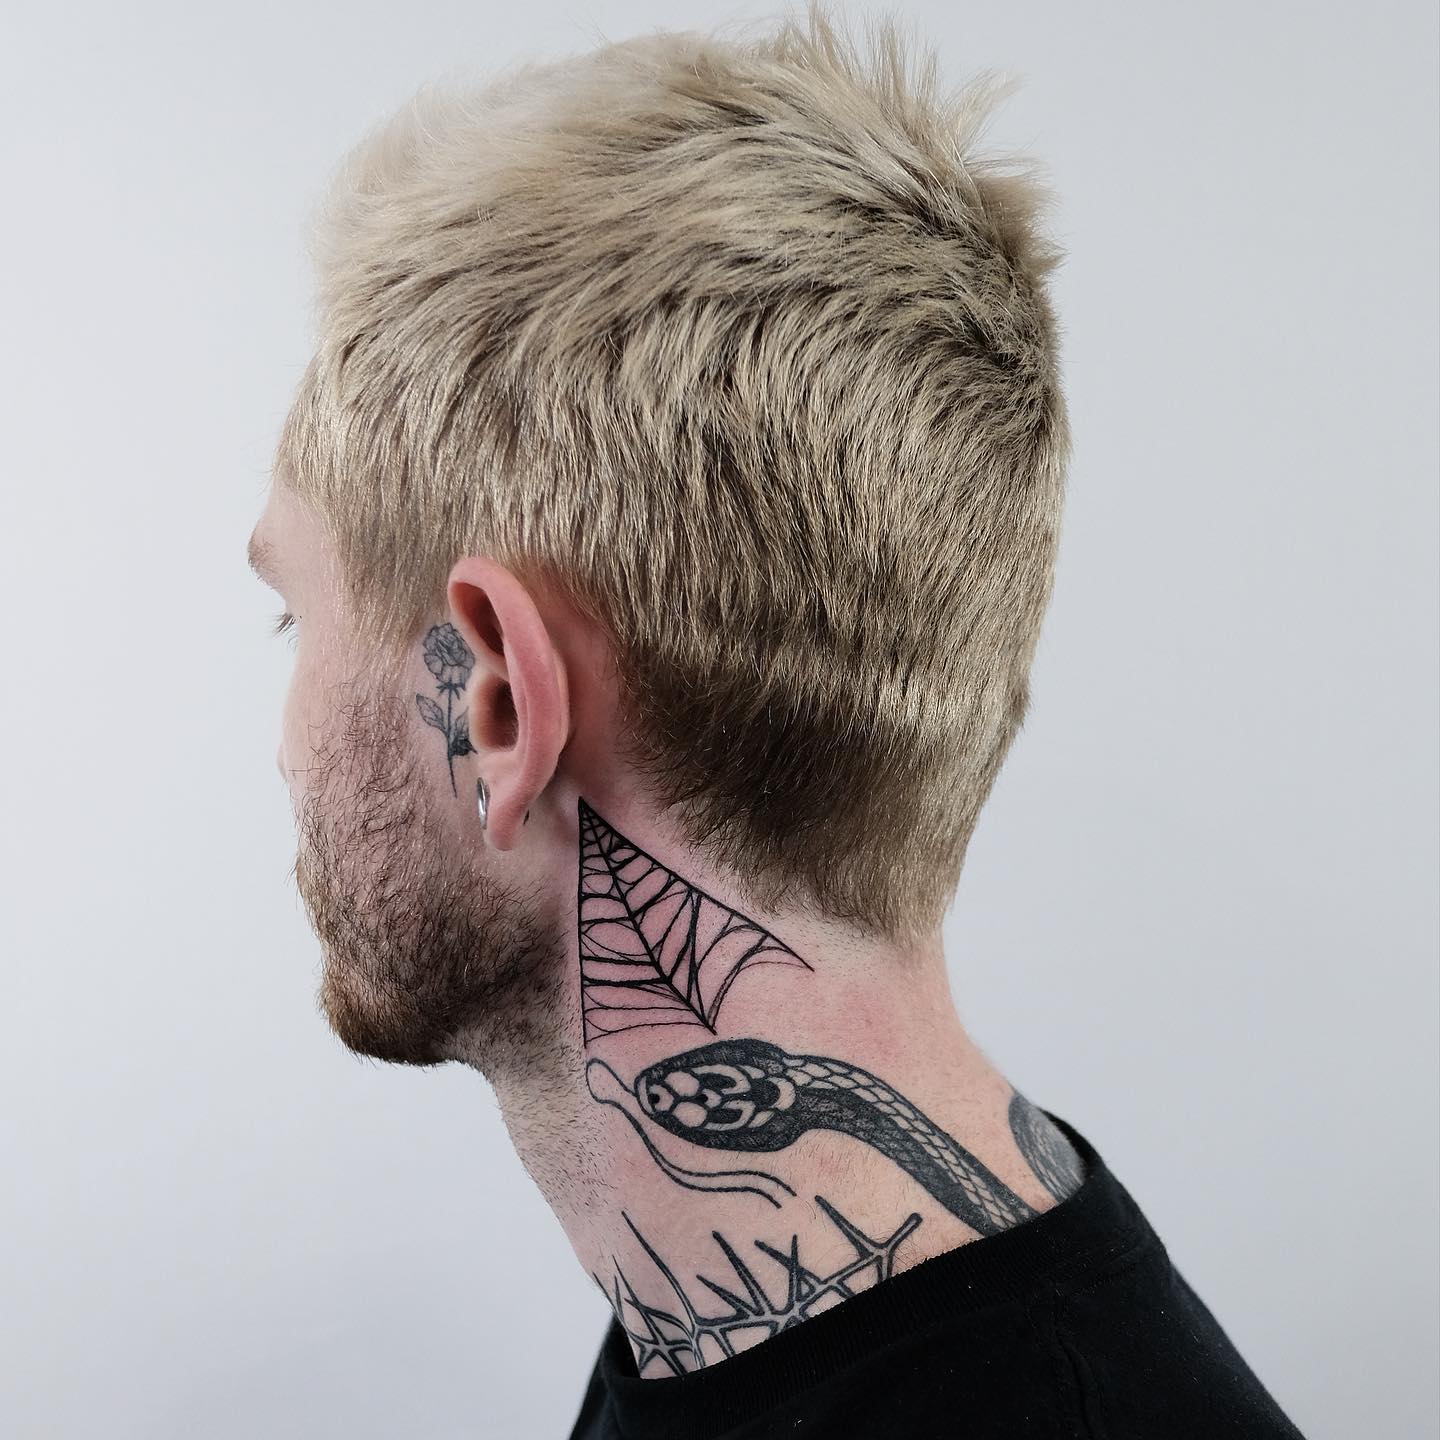 This neck tattoo is for those who dare to look bold and different. If your job allows you to rock something different and quirky, give it a go with this design.